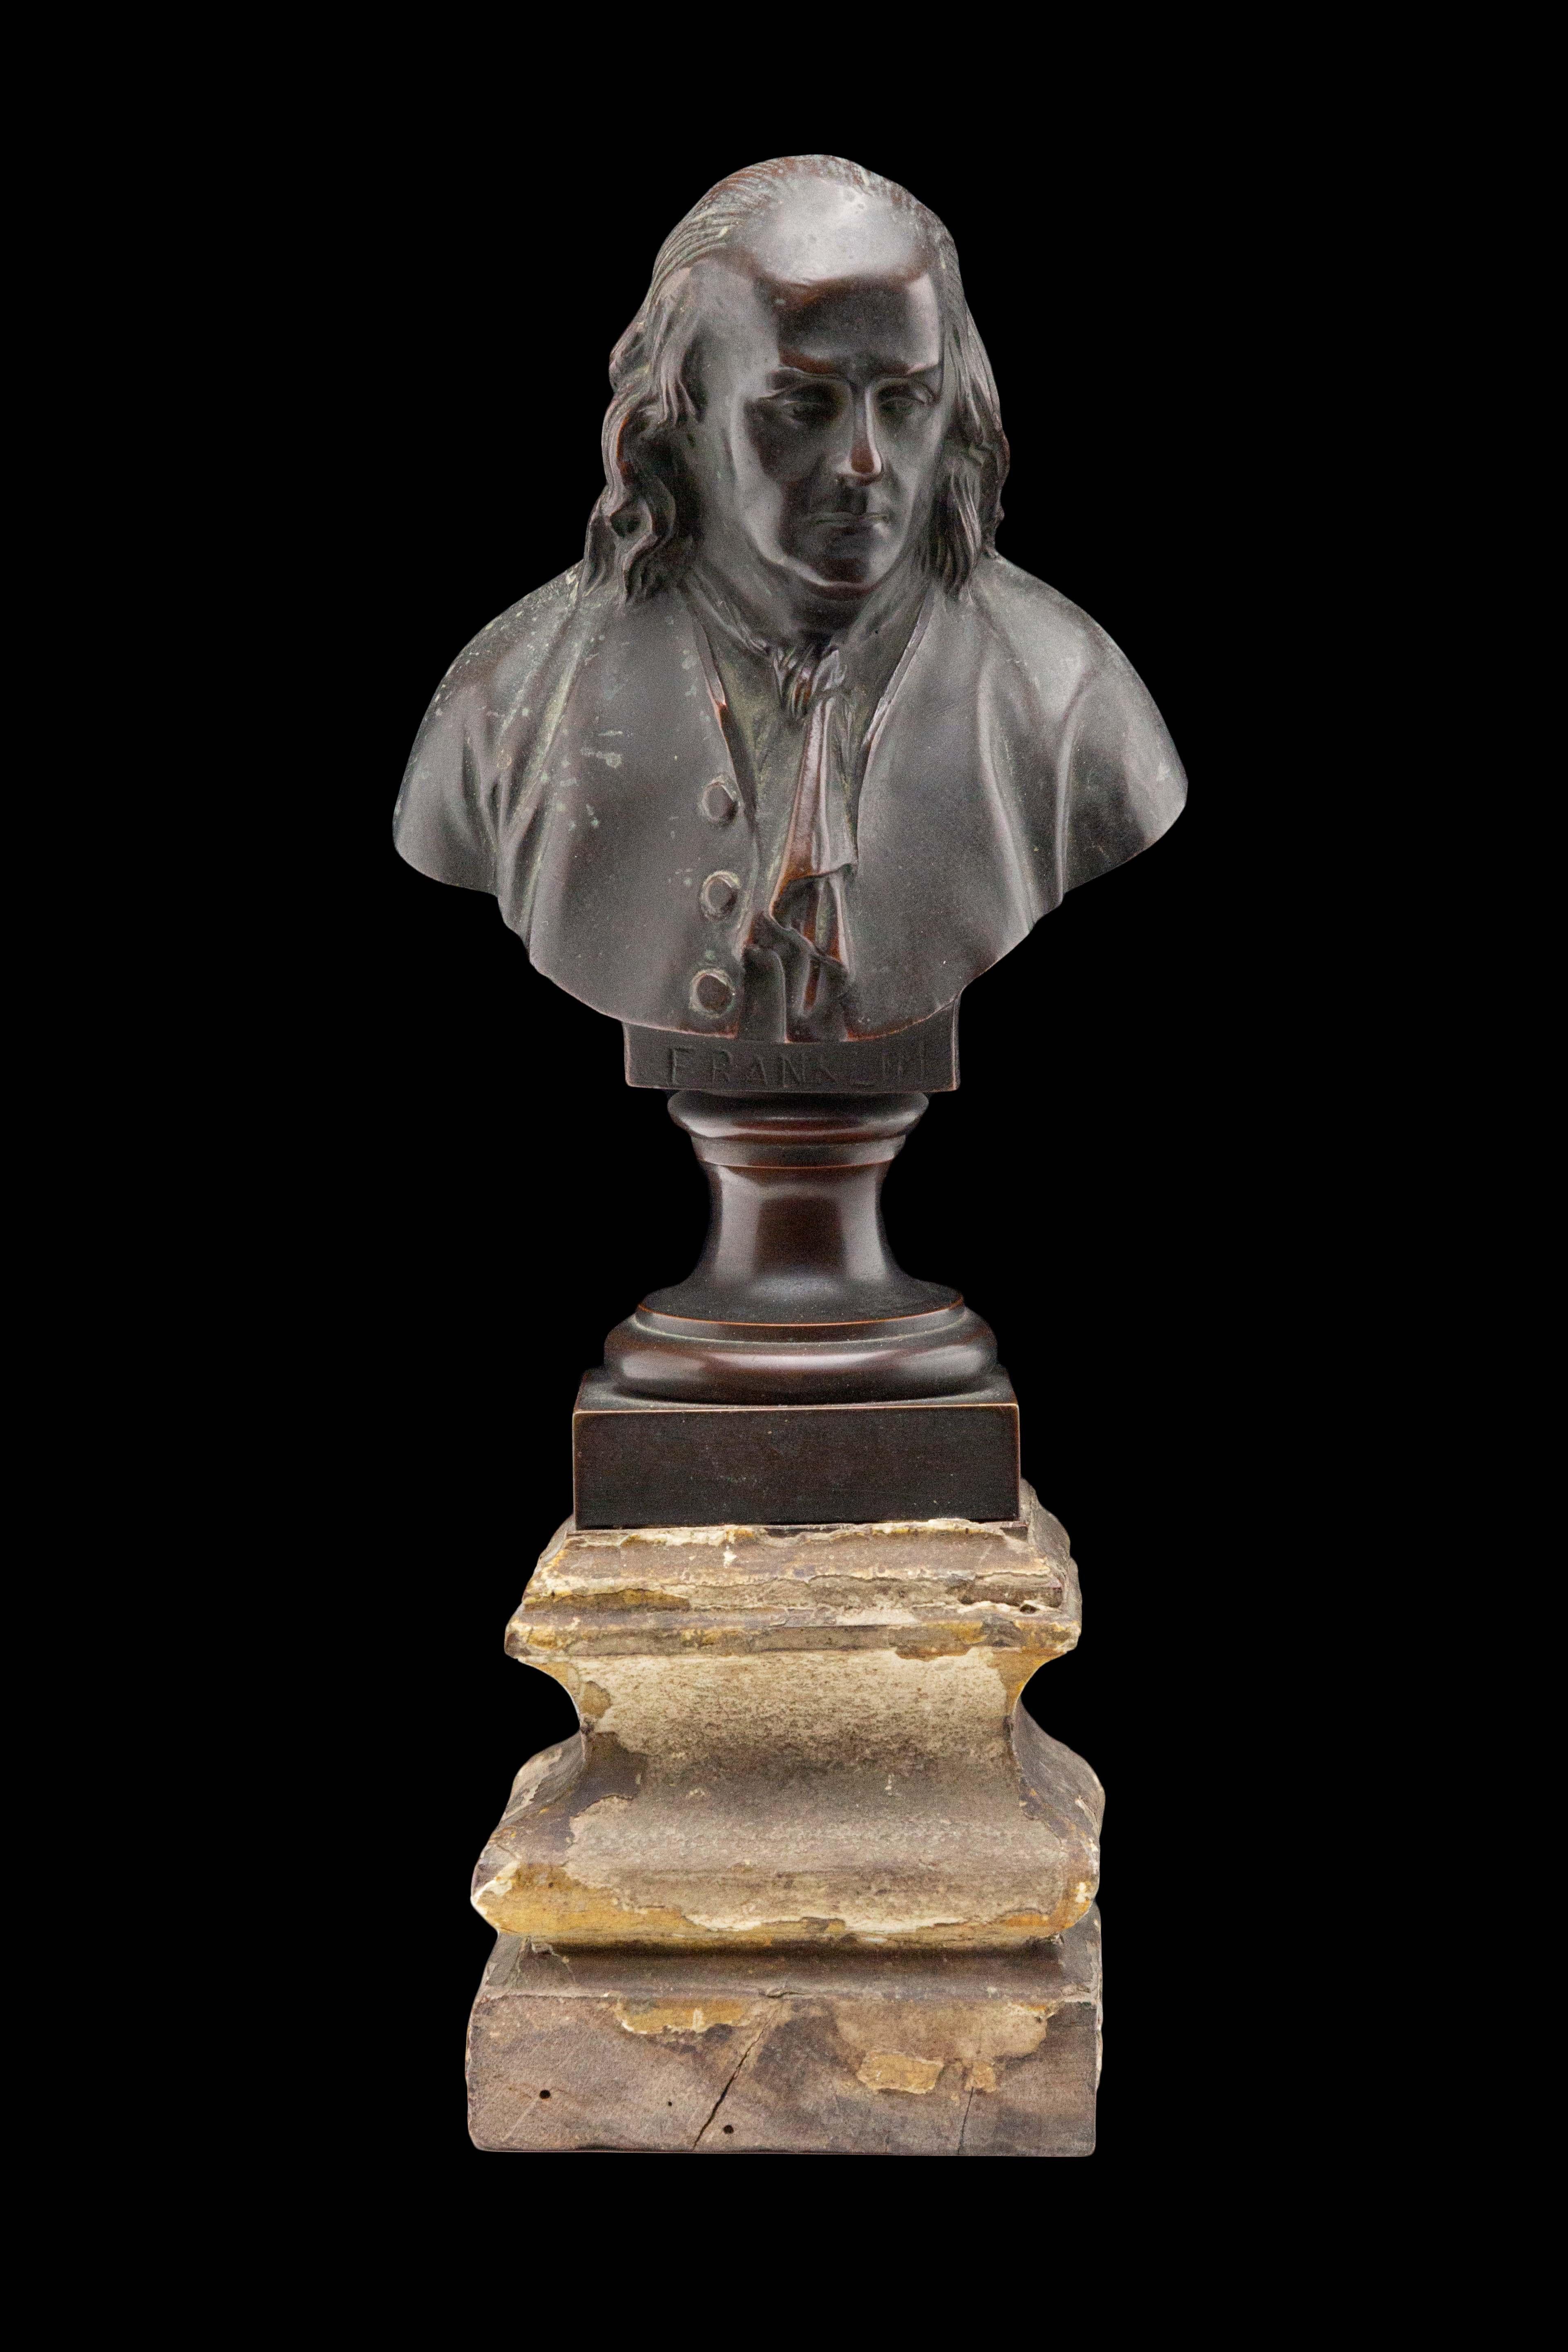 19th Century bronze bust of Ben Franklin on wooden plinth

Measures: 3.5